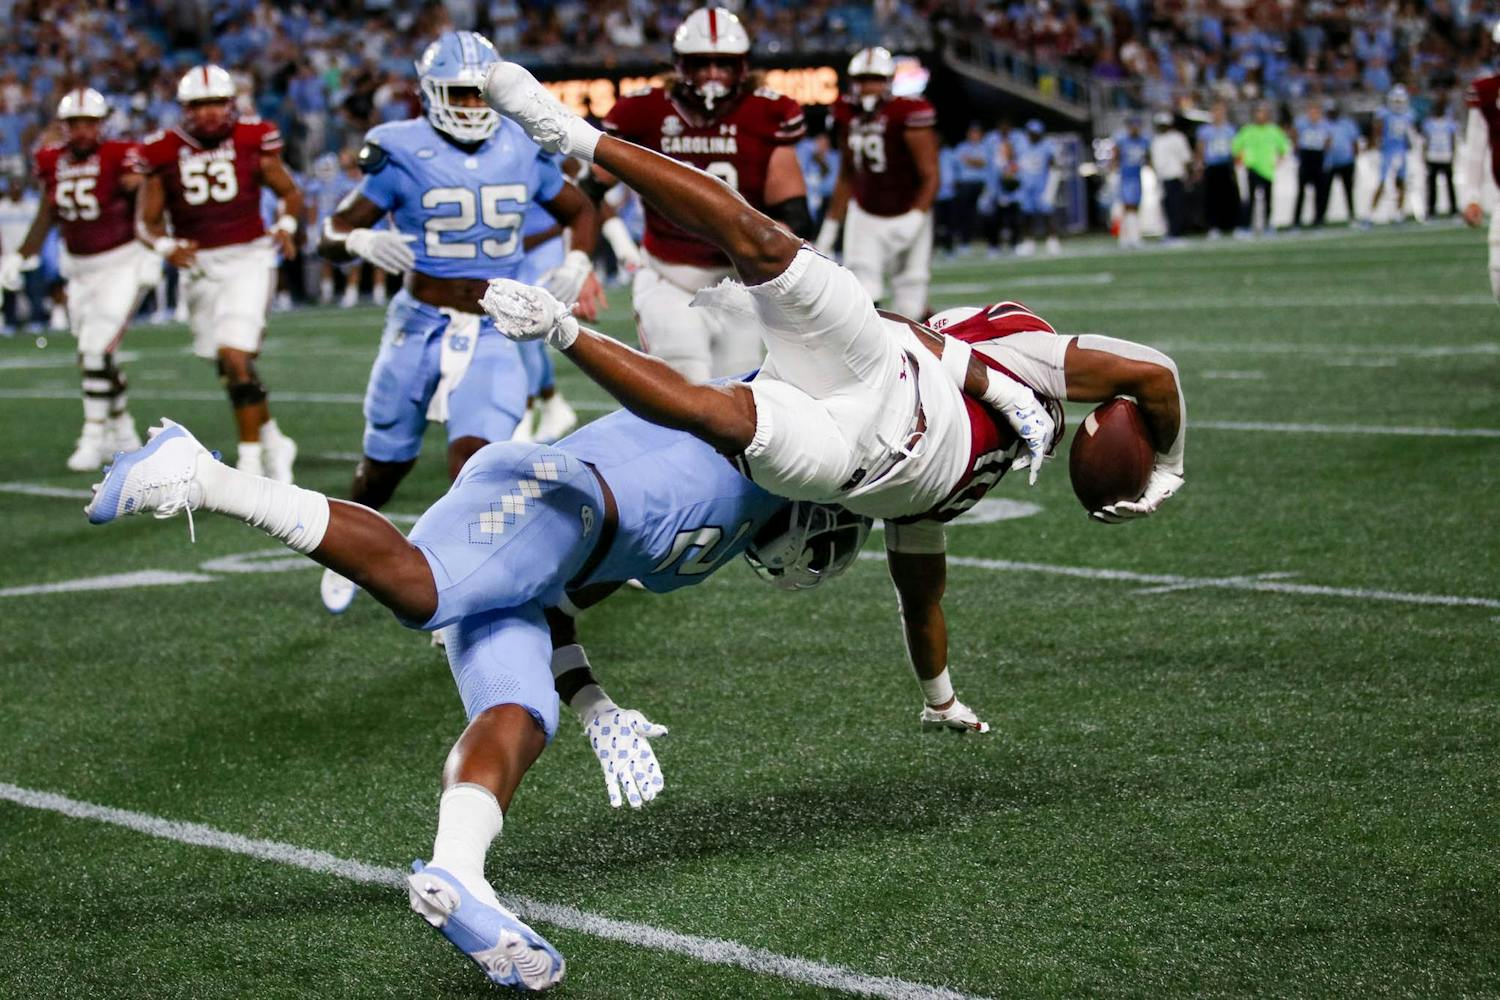 The University of North Carolina and the University of South Carolina met at the Bank of America Stadium in Charlotte, North Carolina, for the 2023 season's opening game. The Tar Heels defeated the Gamecocks 31-17 and now lead the series between the two teams 36-20-4. Redshirt senior quarterback Spencer Rattler was 30-39 with 353 yards in the season opener.